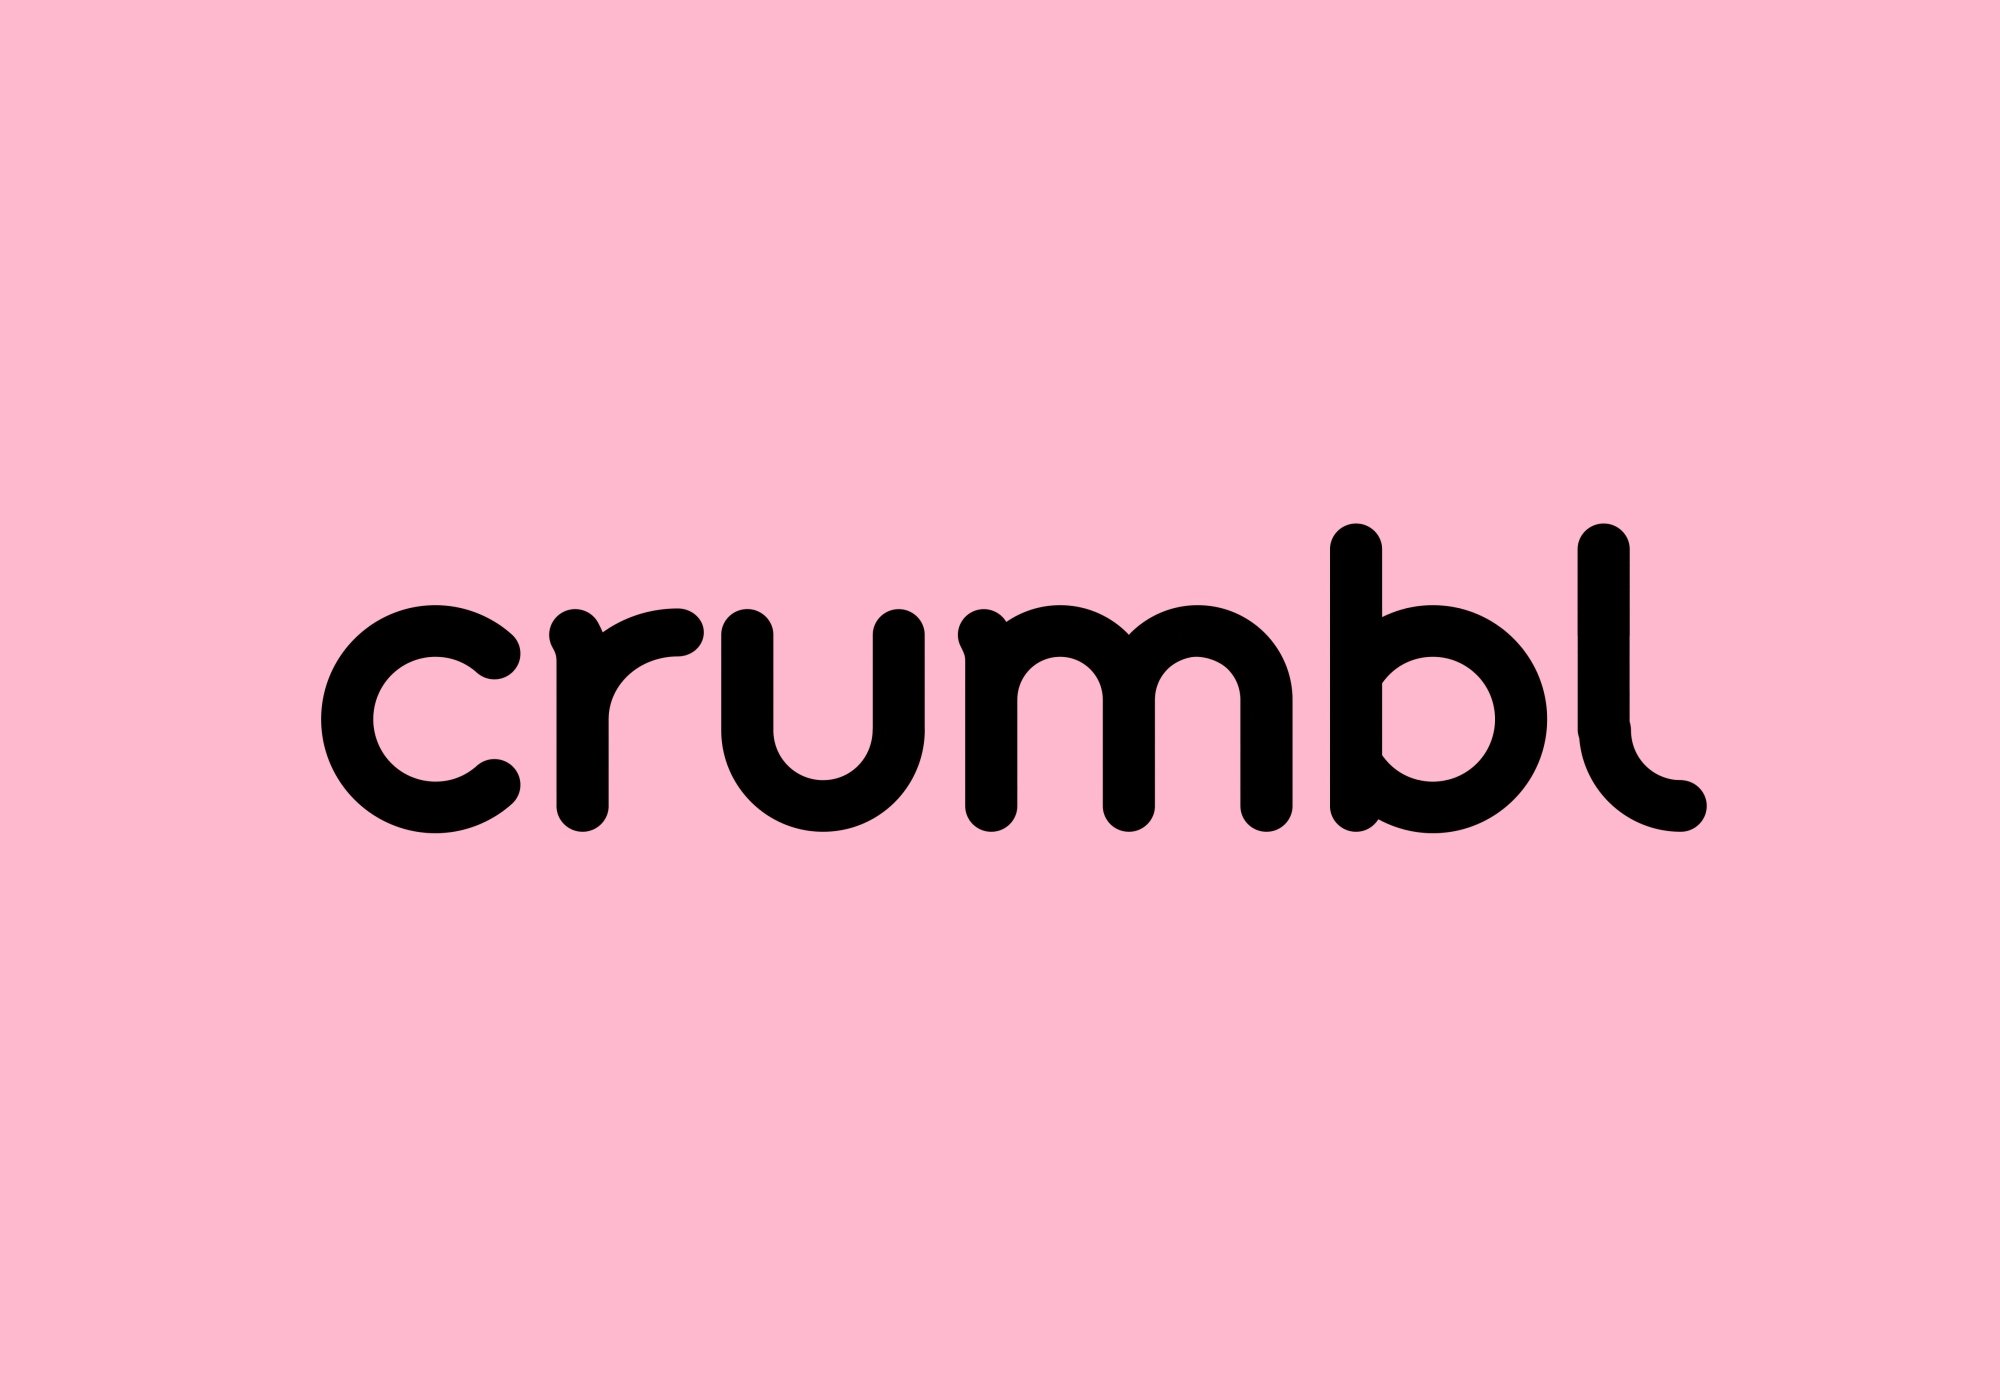 New logotype, custom typeface, bespoke illustration and motion graphics for cookie brand Crumbl designed by Turner Duckworth